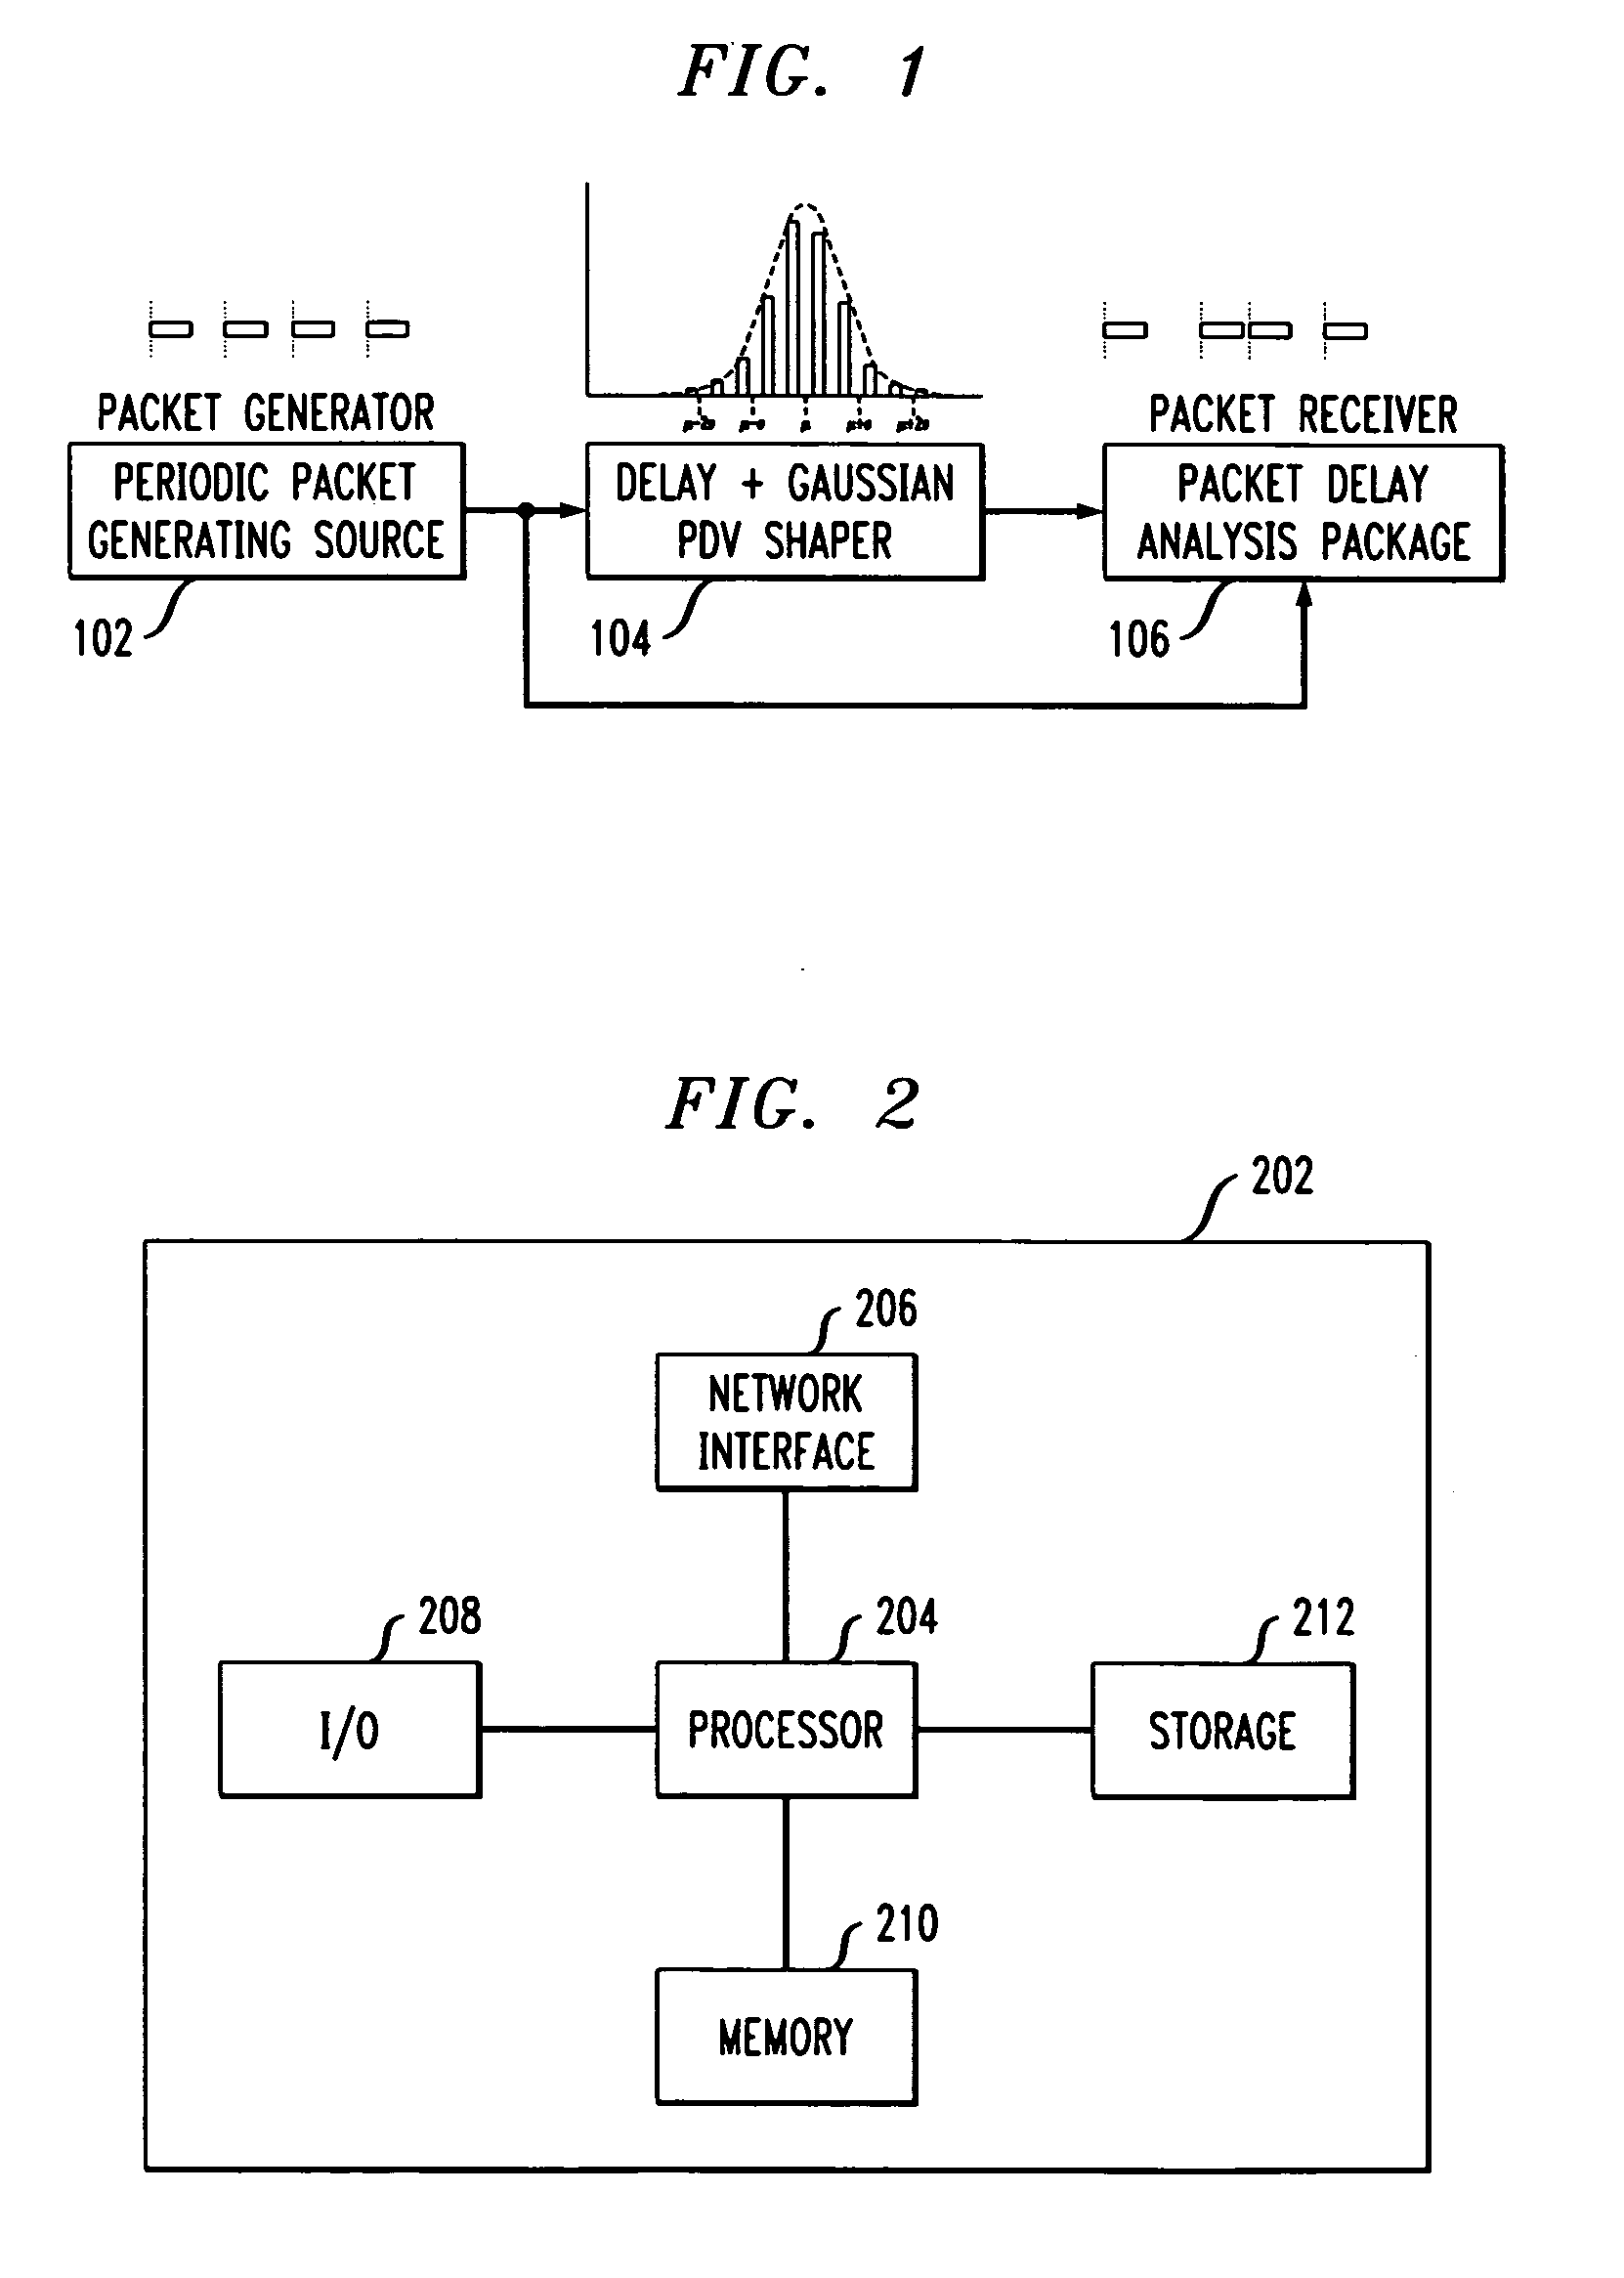 Derivative packet delay variation as a metric for packet timing recovery stress testing